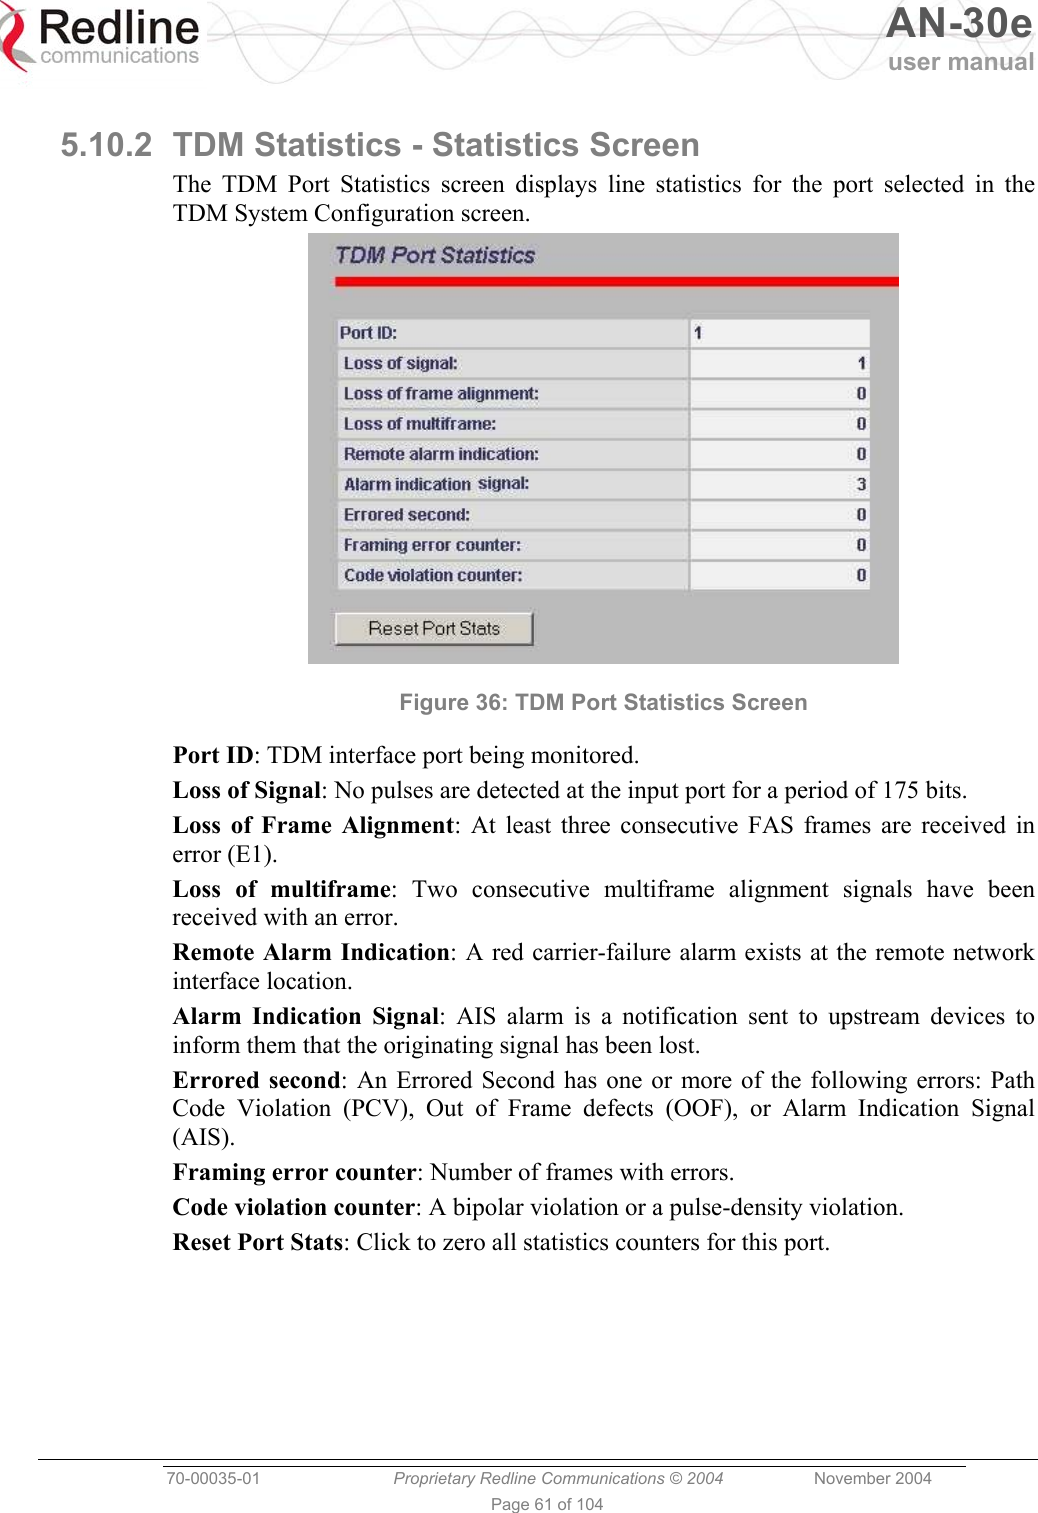   AN-30e user manual  70-00035-01  Proprietary Redline Communications © 2004 November 2004   Page 61 of 104  5.10.2  TDM Statistics - Statistics Screen The TDM Port Statistics screen displays line statistics for the port selected in the TDM System Configuration screen.  Figure 36: TDM Port Statistics Screen Port ID: TDM interface port being monitored. Loss of Signal: No pulses are detected at the input port for a period of 175 bits. Loss of Frame Alignment: At least three consecutive FAS frames are received in error (E1). Loss of multiframe: Two consecutive multiframe alignment signals have been received with an error. Remote Alarm Indication: A red carrier-failure alarm exists at the remote network interface location. Alarm Indication Signal: AIS alarm is a notification sent to upstream devices to inform them that the originating signal has been lost. Errored second: An Errored Second has one or more of the following errors: Path Code Violation (PCV), Out of Frame defects (OOF), or Alarm Indication Signal (AIS). Framing error counter: Number of frames with errors. Code violation counter: A bipolar violation or a pulse-density violation. Reset Port Stats: Click to zero all statistics counters for this port.   